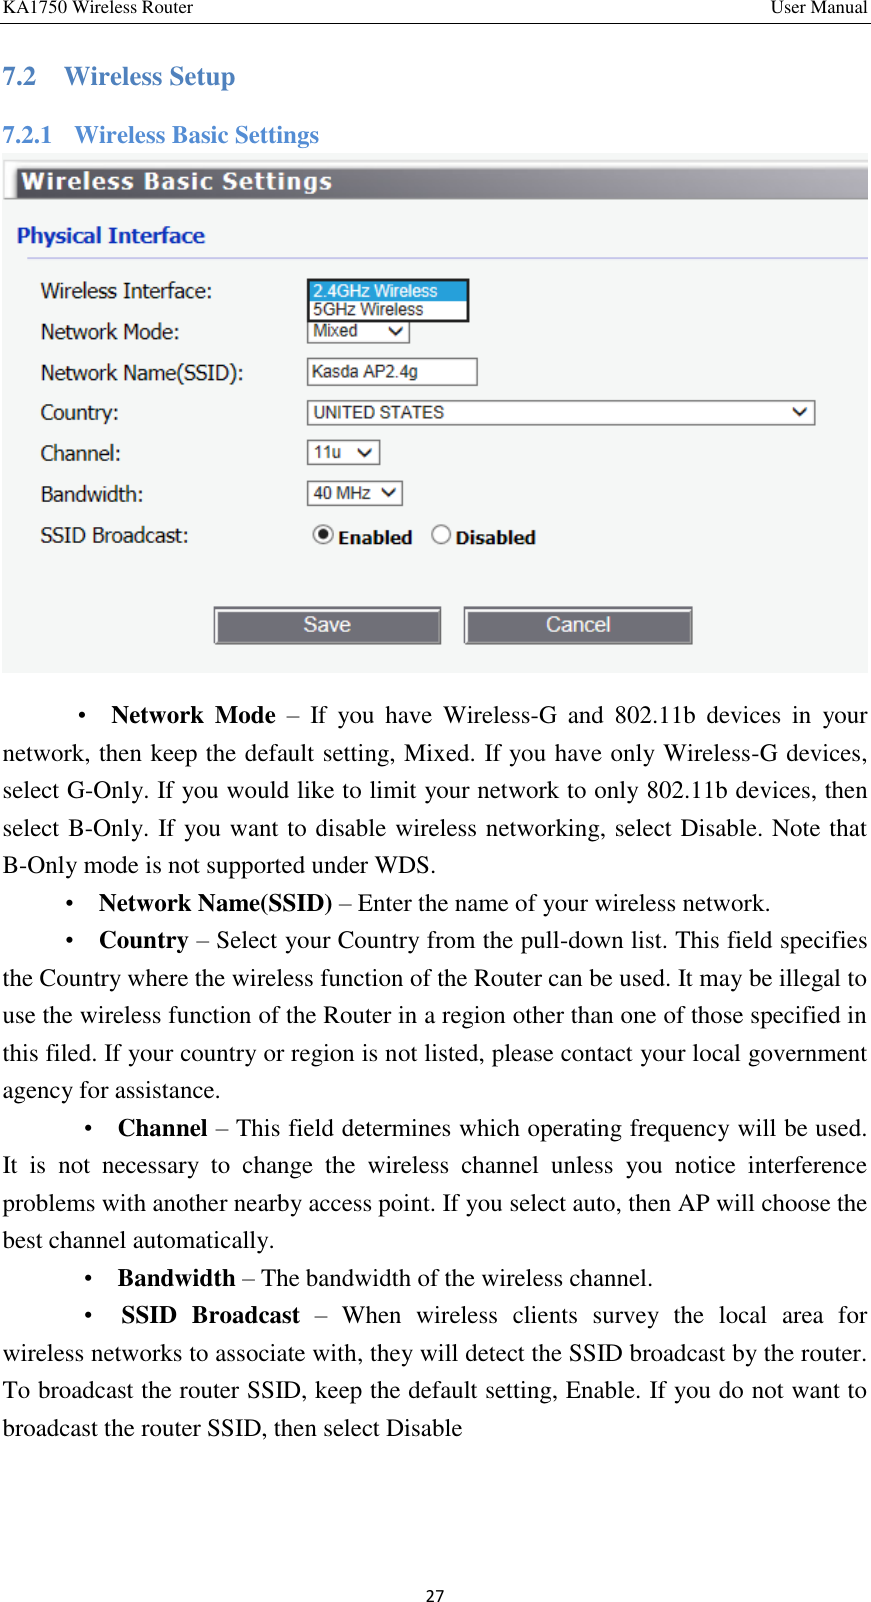 KA1750 Wireless Router       User Manual 27 7.2    Wireless Setup 7.2.1    Wireless Basic Settings    •   Network  Mode –  If  you  have  Wireless-G  and  802.11b  devices  in  your network, then keep the default setting, Mixed. If you have only Wireless-G devices, select G-Only. If you would like to limit your network to only 802.11b devices, then select B-Only. If you want to disable wireless networking, select Disable. Note that B-Only mode is not supported under WDS.   •    Network Name(SSID) – Enter the name of your wireless network. •    Country – Select your Country from the pull-down list. This field specifies the Country where the wireless function of the Router can be used. It may be illegal to use the wireless function of the Router in a region other than one of those specified in this filed. If your country or region is not listed, please contact your local government agency for assistance.     •    Channel – This field determines which operating frequency will be used. It  is  not  necessary  to  change  the  wireless  channel  unless  you  notice  interference problems with another nearby access point. If you select auto, then AP will choose the best channel automatically.     •    Bandwidth – The bandwidth of the wireless channel.     •    SSID  Broadcast –  When  wireless  clients  survey  the  local  area  for wireless networks to associate with, they will detect the SSID broadcast by the router. To broadcast the router SSID, keep the default setting, Enable. If you do not want to broadcast the router SSID, then select Disable    